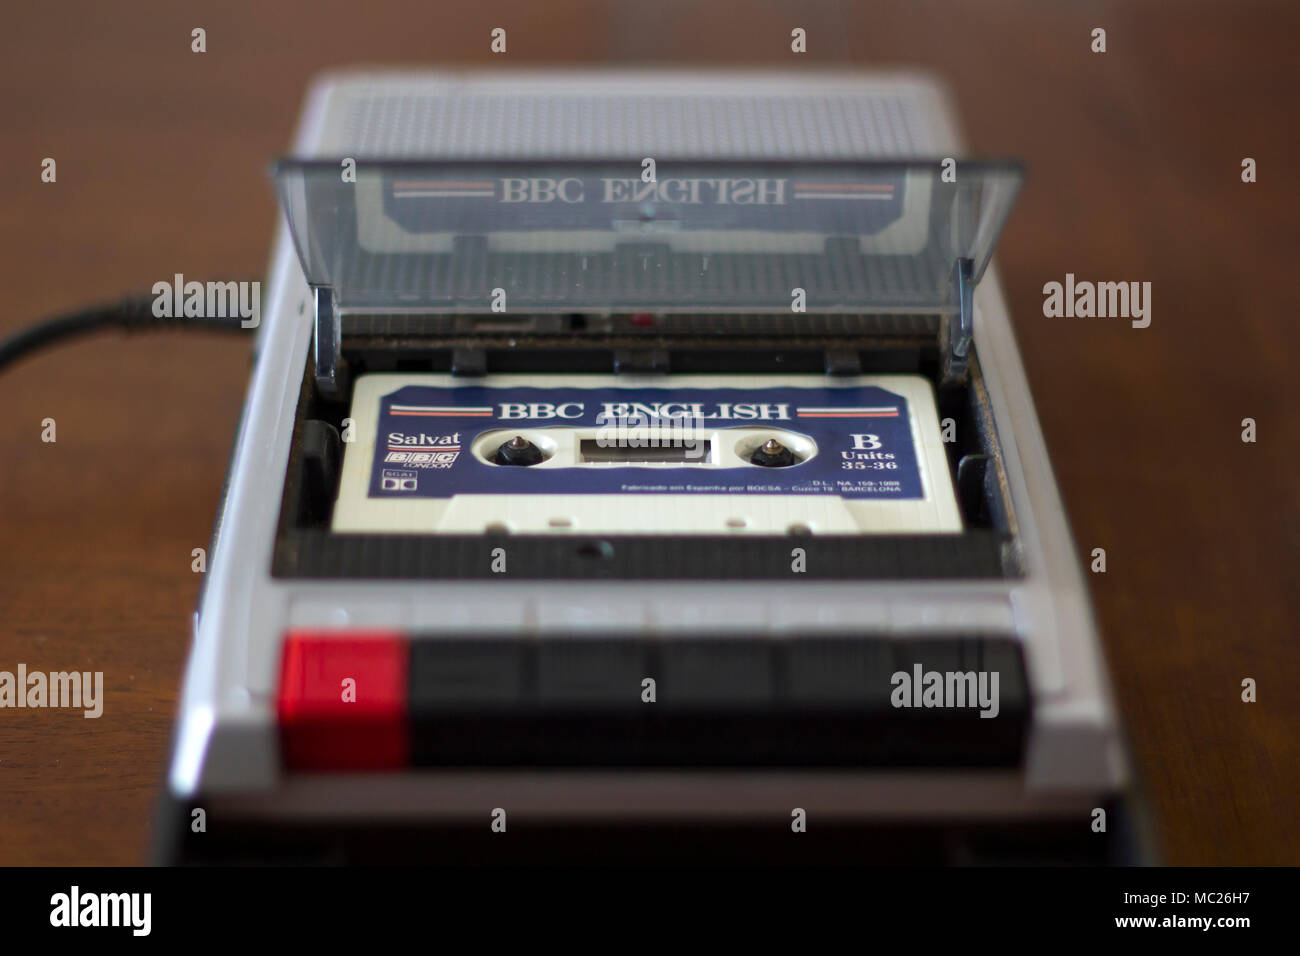 Vintage cassette tape player with english lessons cassette tape inside Stock Photo